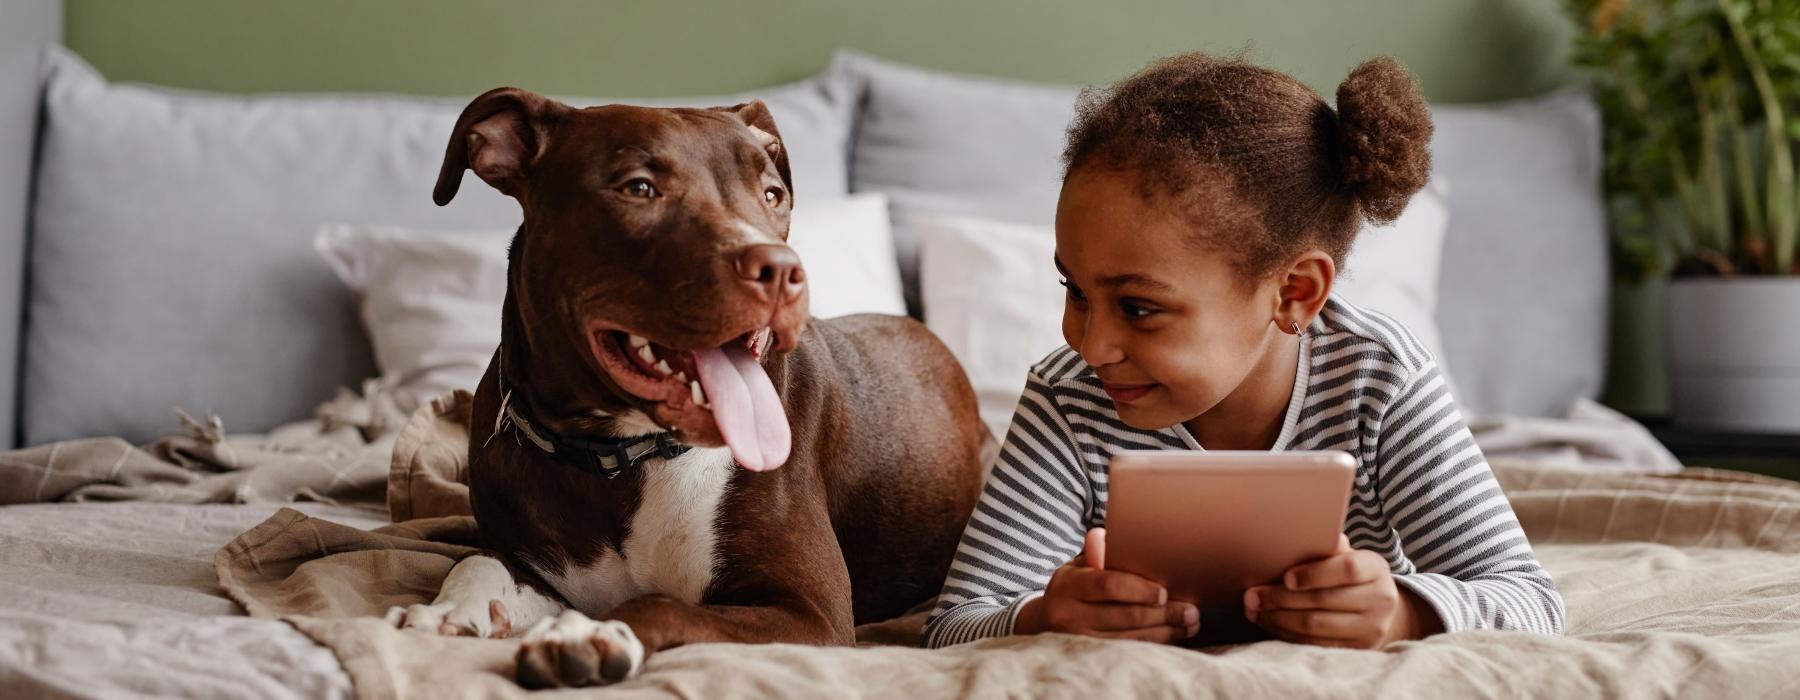 a dog and a child looking at a tablet